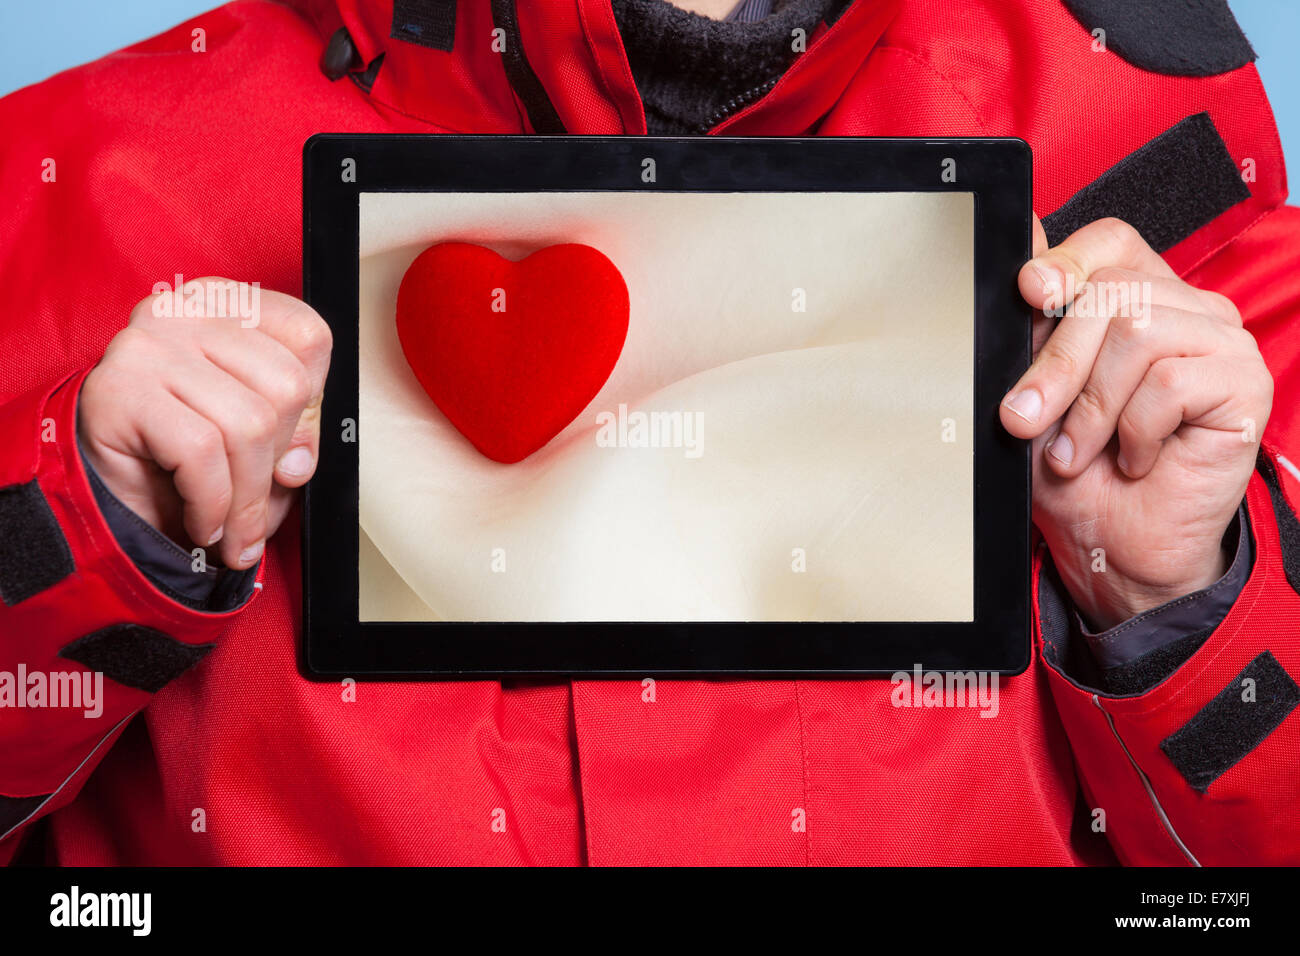 Closeup of male hands holding ipad with photo of valentine heart love symbol. Lonely man showing screen tablet touchpad dreaming Stock Photo